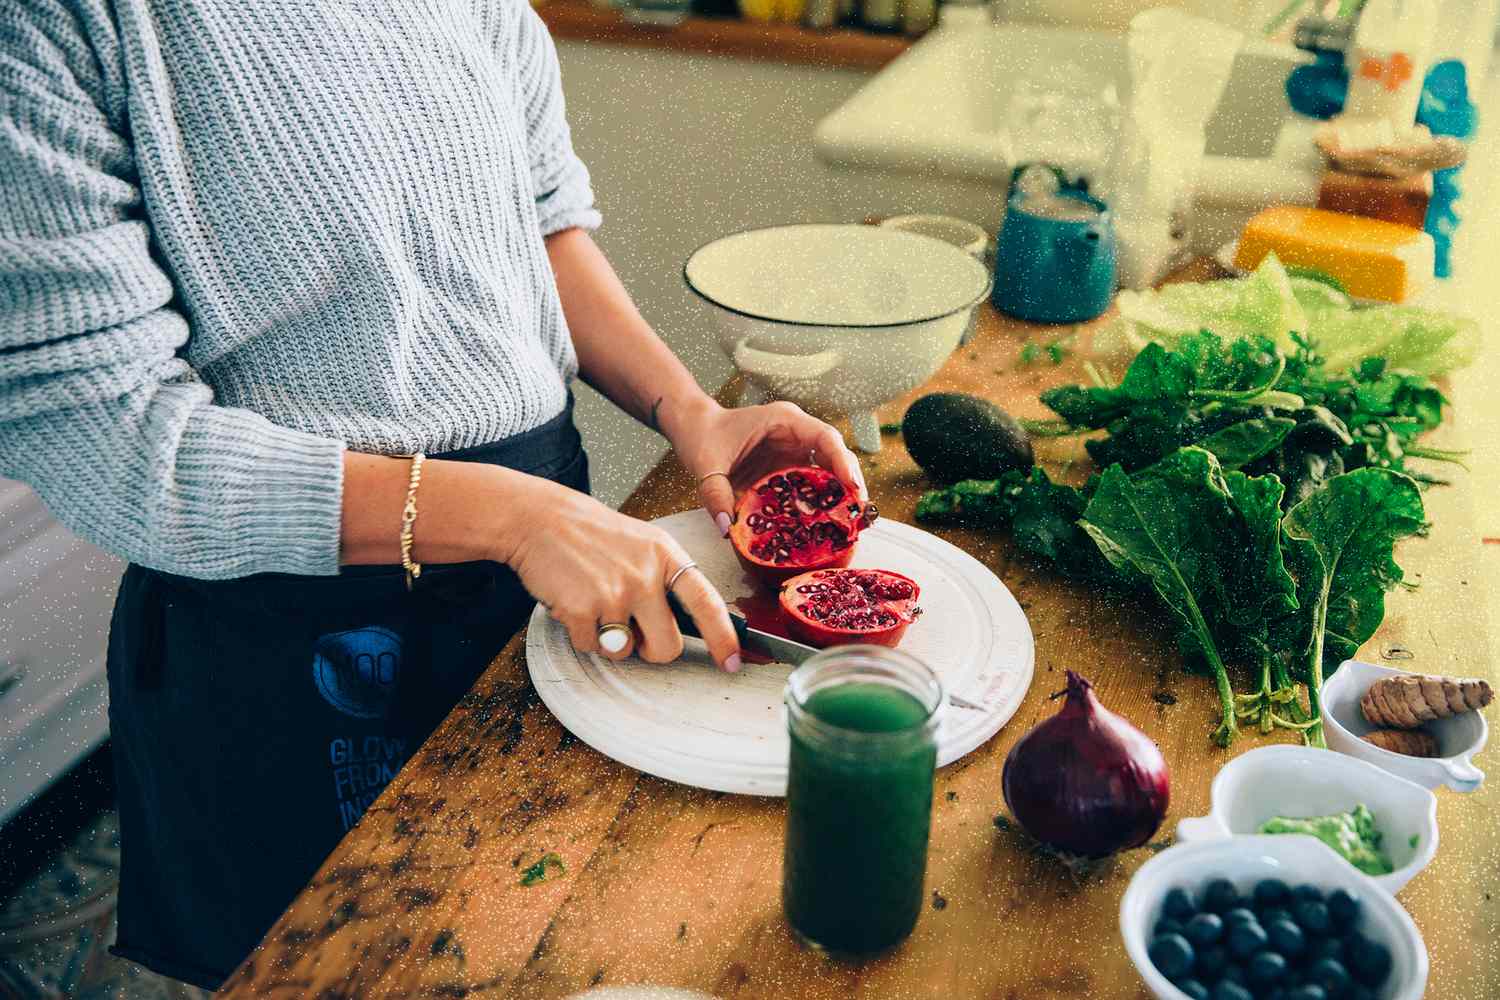 Hands of woman cutting pomegranate